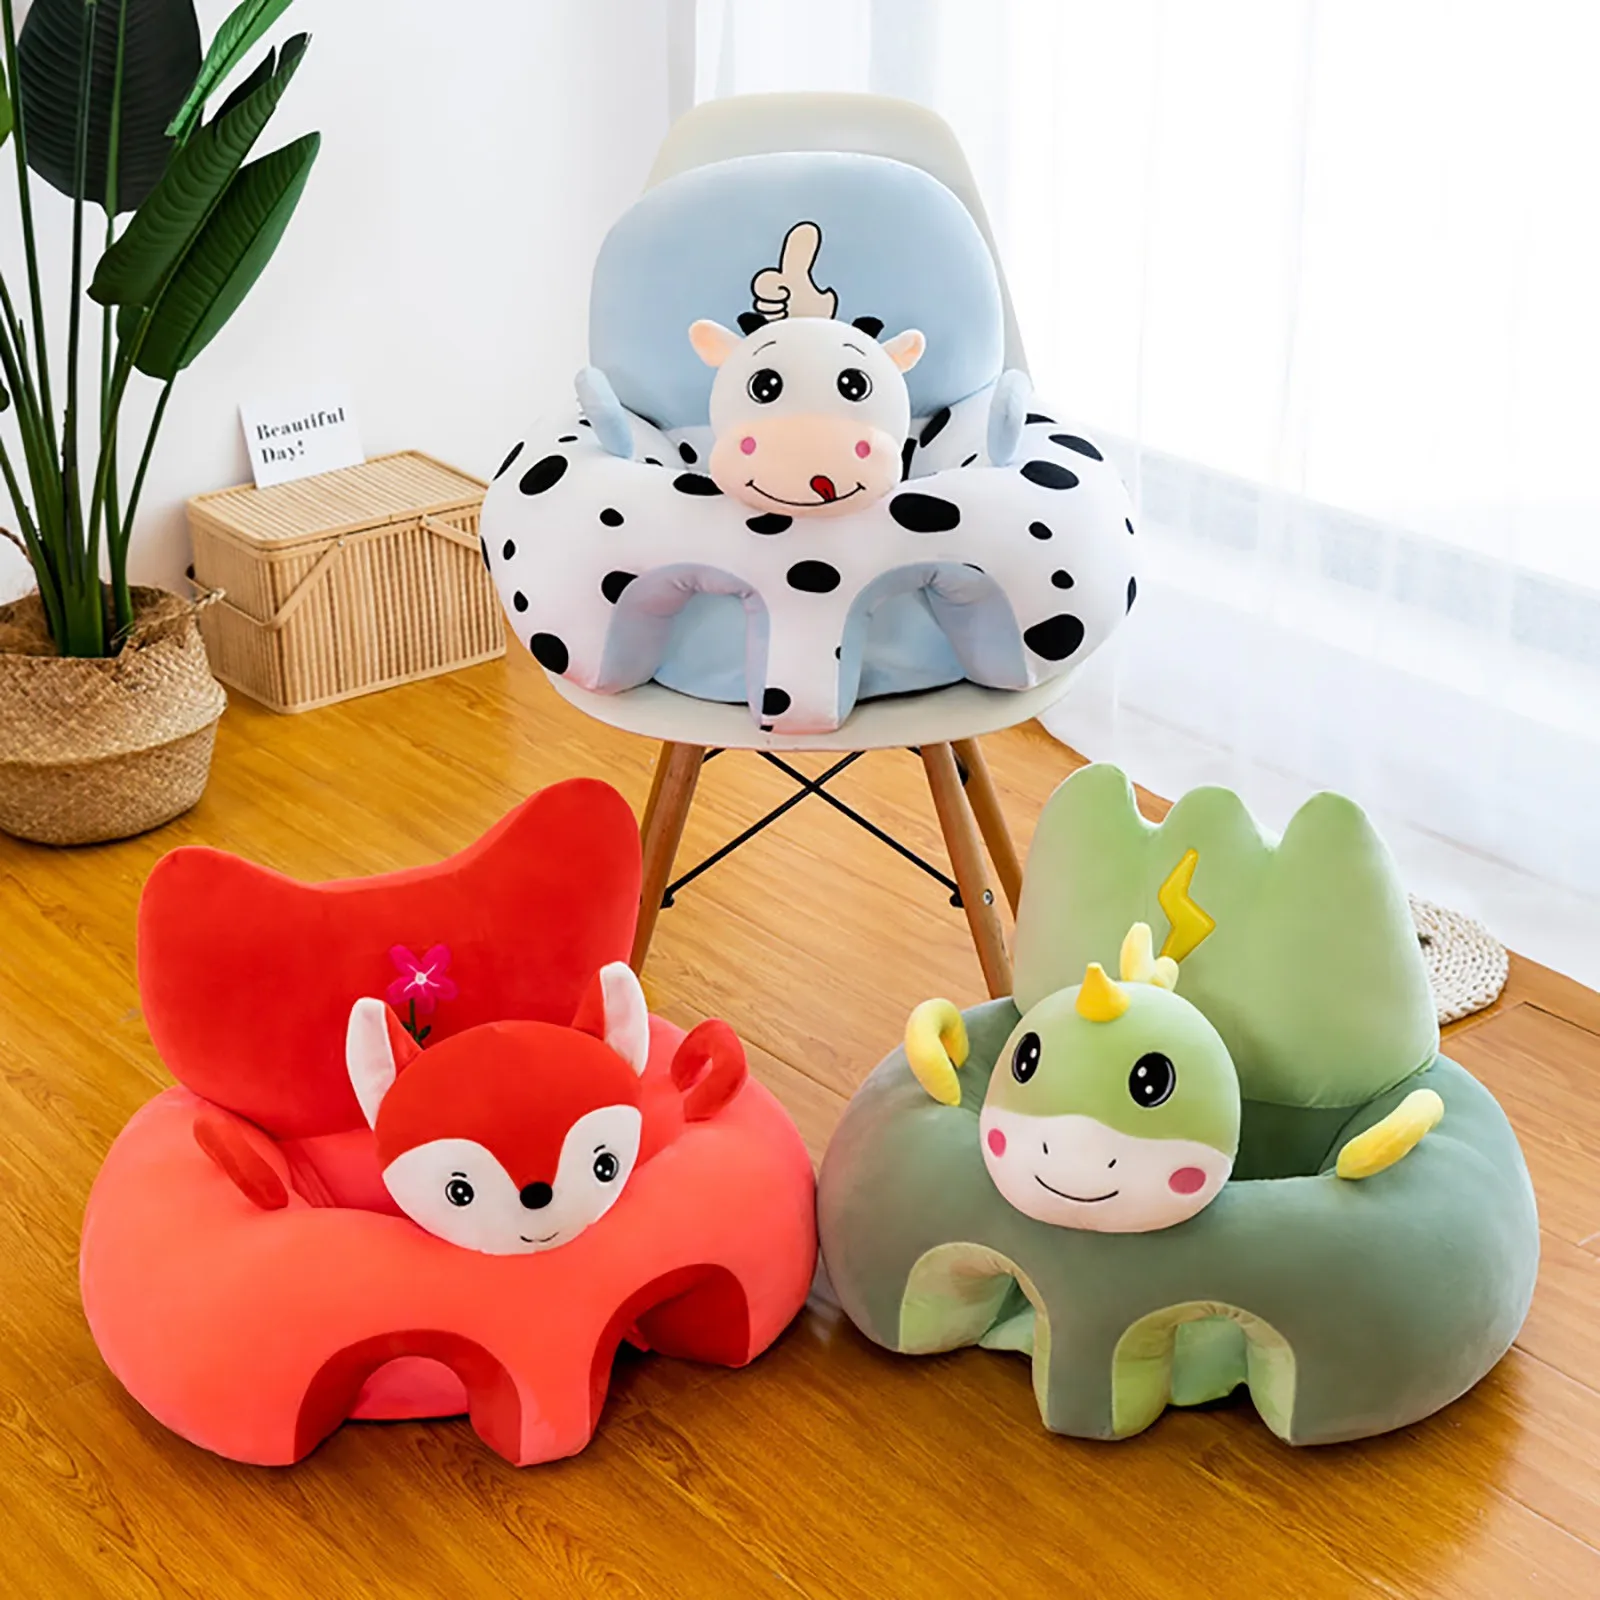 2022 New Style Children Chair Animal Shape Sofa Cartoon Plush Toy Learning Seat Learning Baby Portable Filled With Cotton new baby sofa infant seat soft cute learning sitting chairs learning sitting for soft chair cushion new design animal plush gift